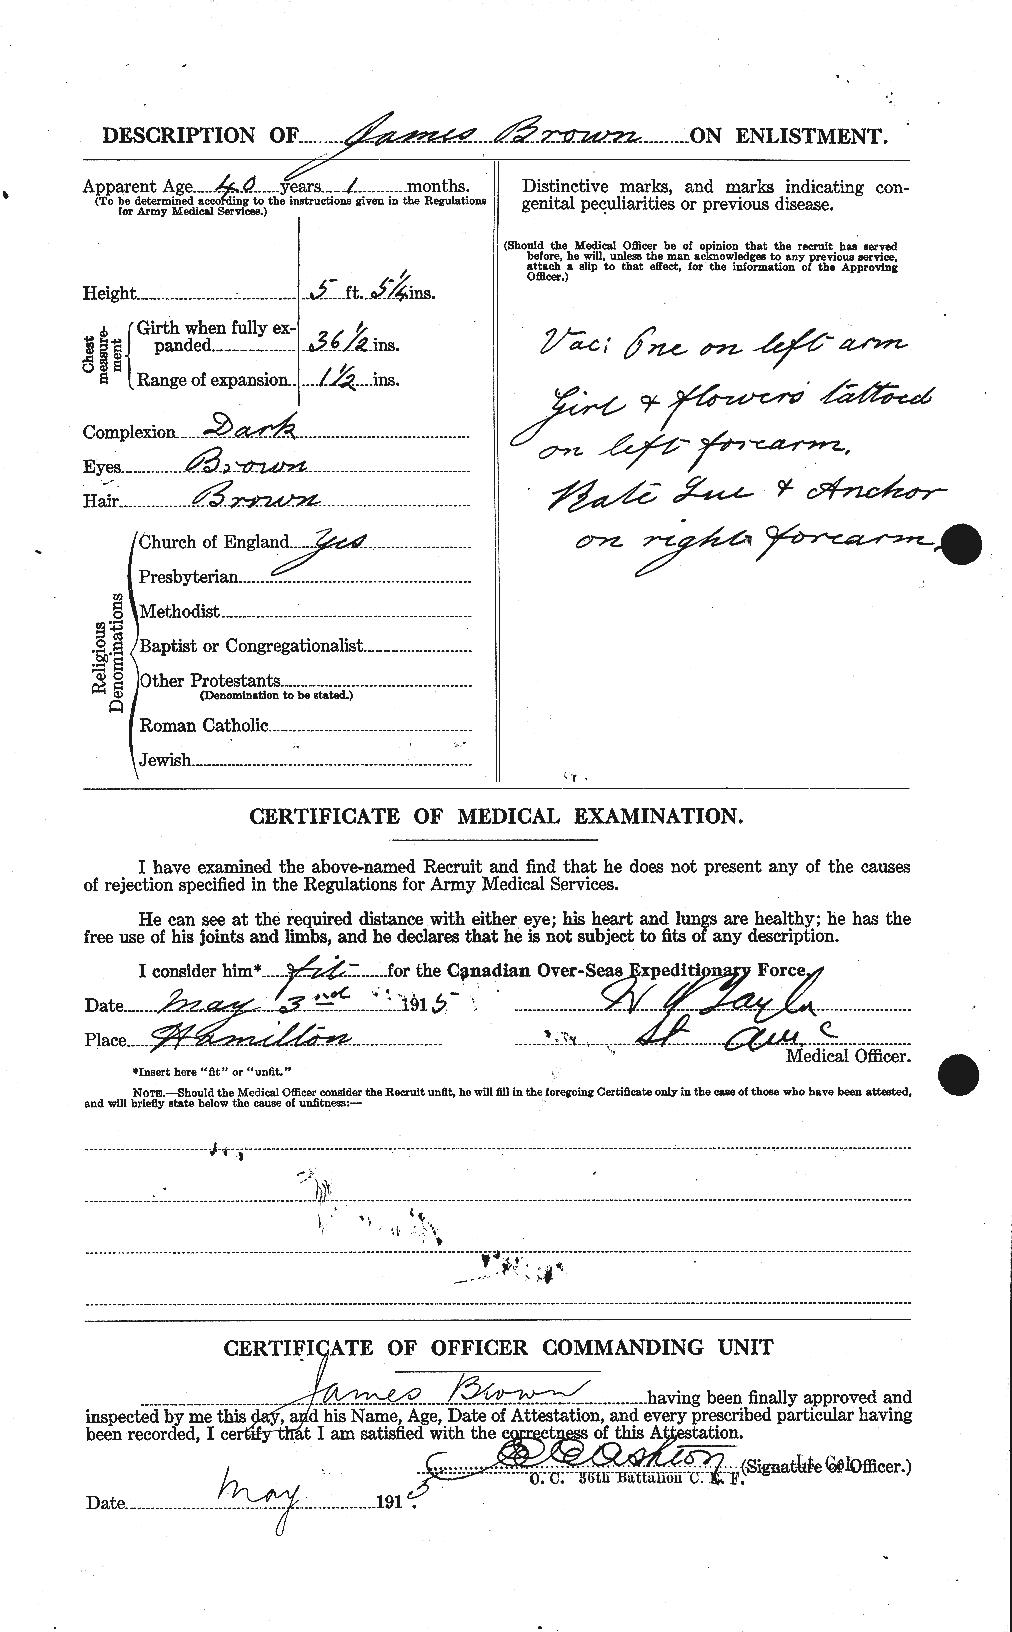 Personnel Records of the First World War - CEF 265693b